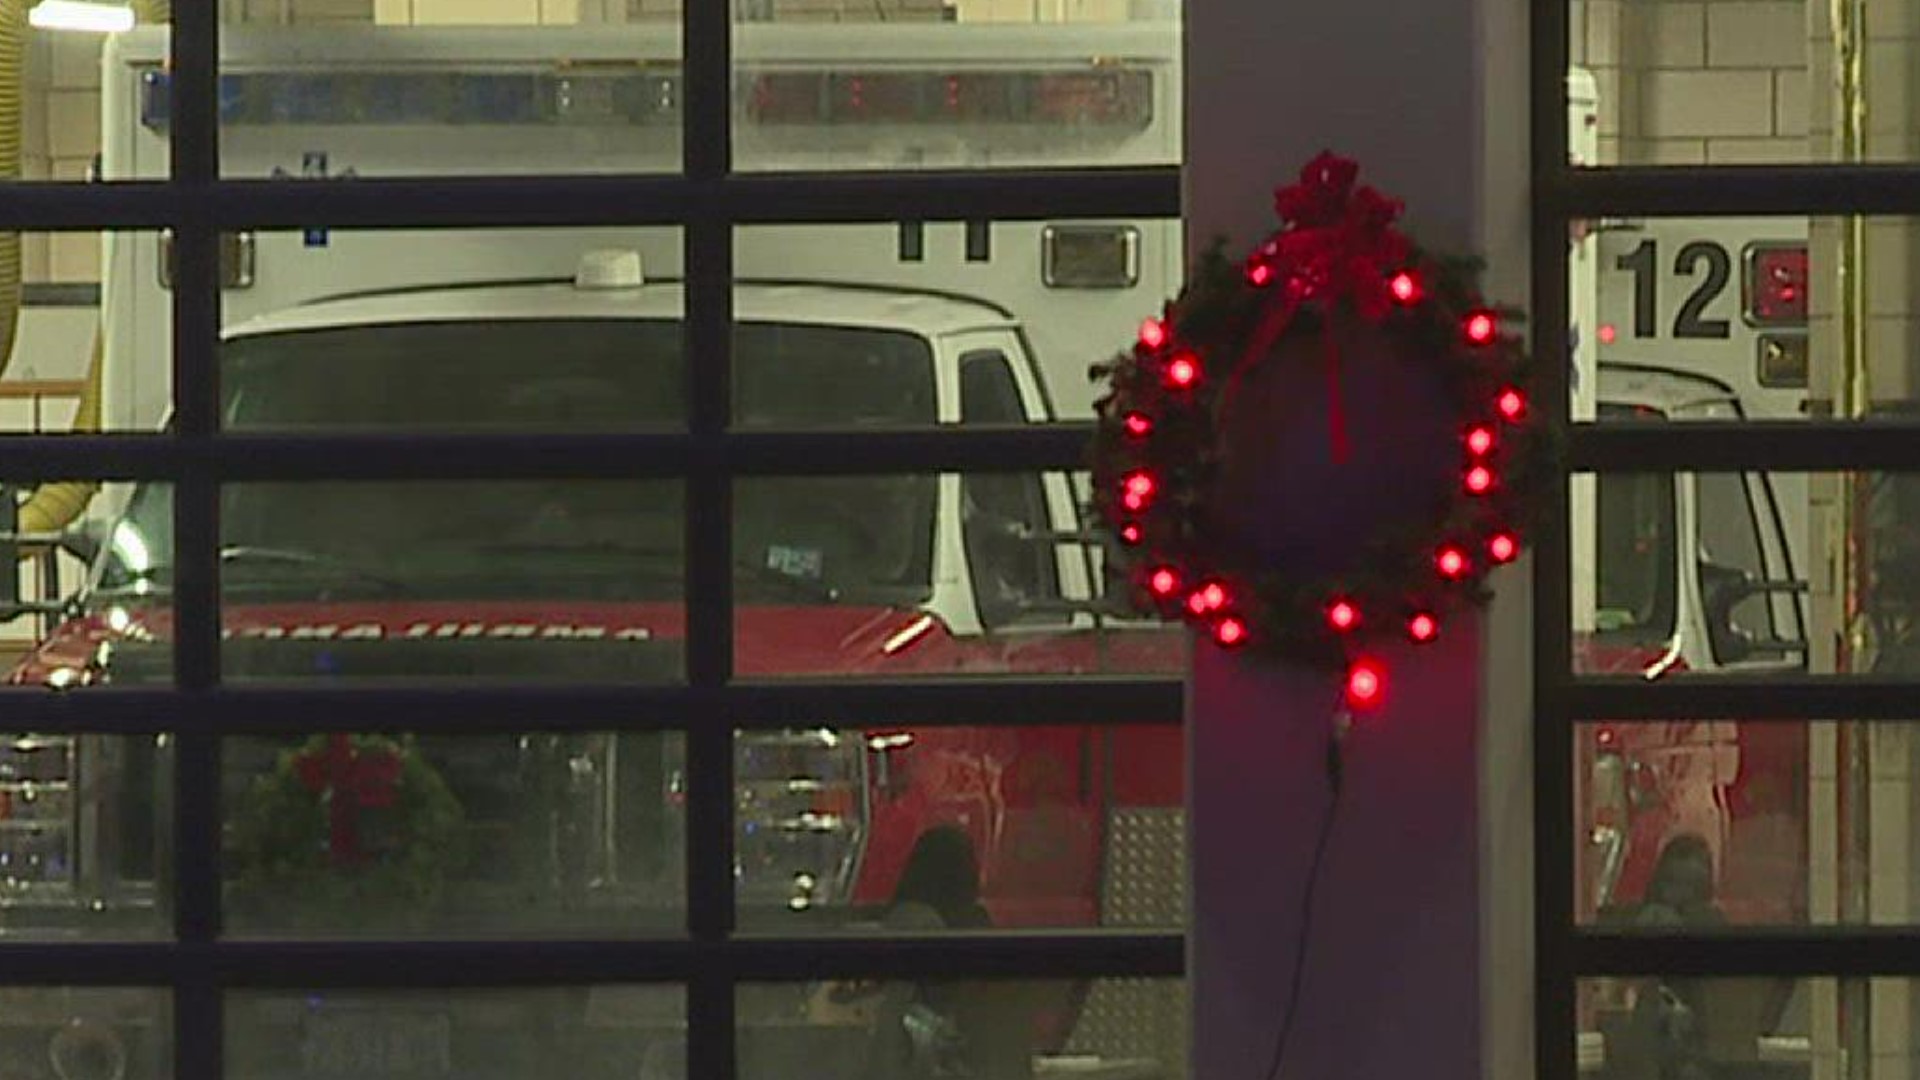 Since the 1950s, Illinois Firefighters have held a 'Keep the Wreath Red' campaign. Since then, the program has stretched nationwide promoting fire safety.